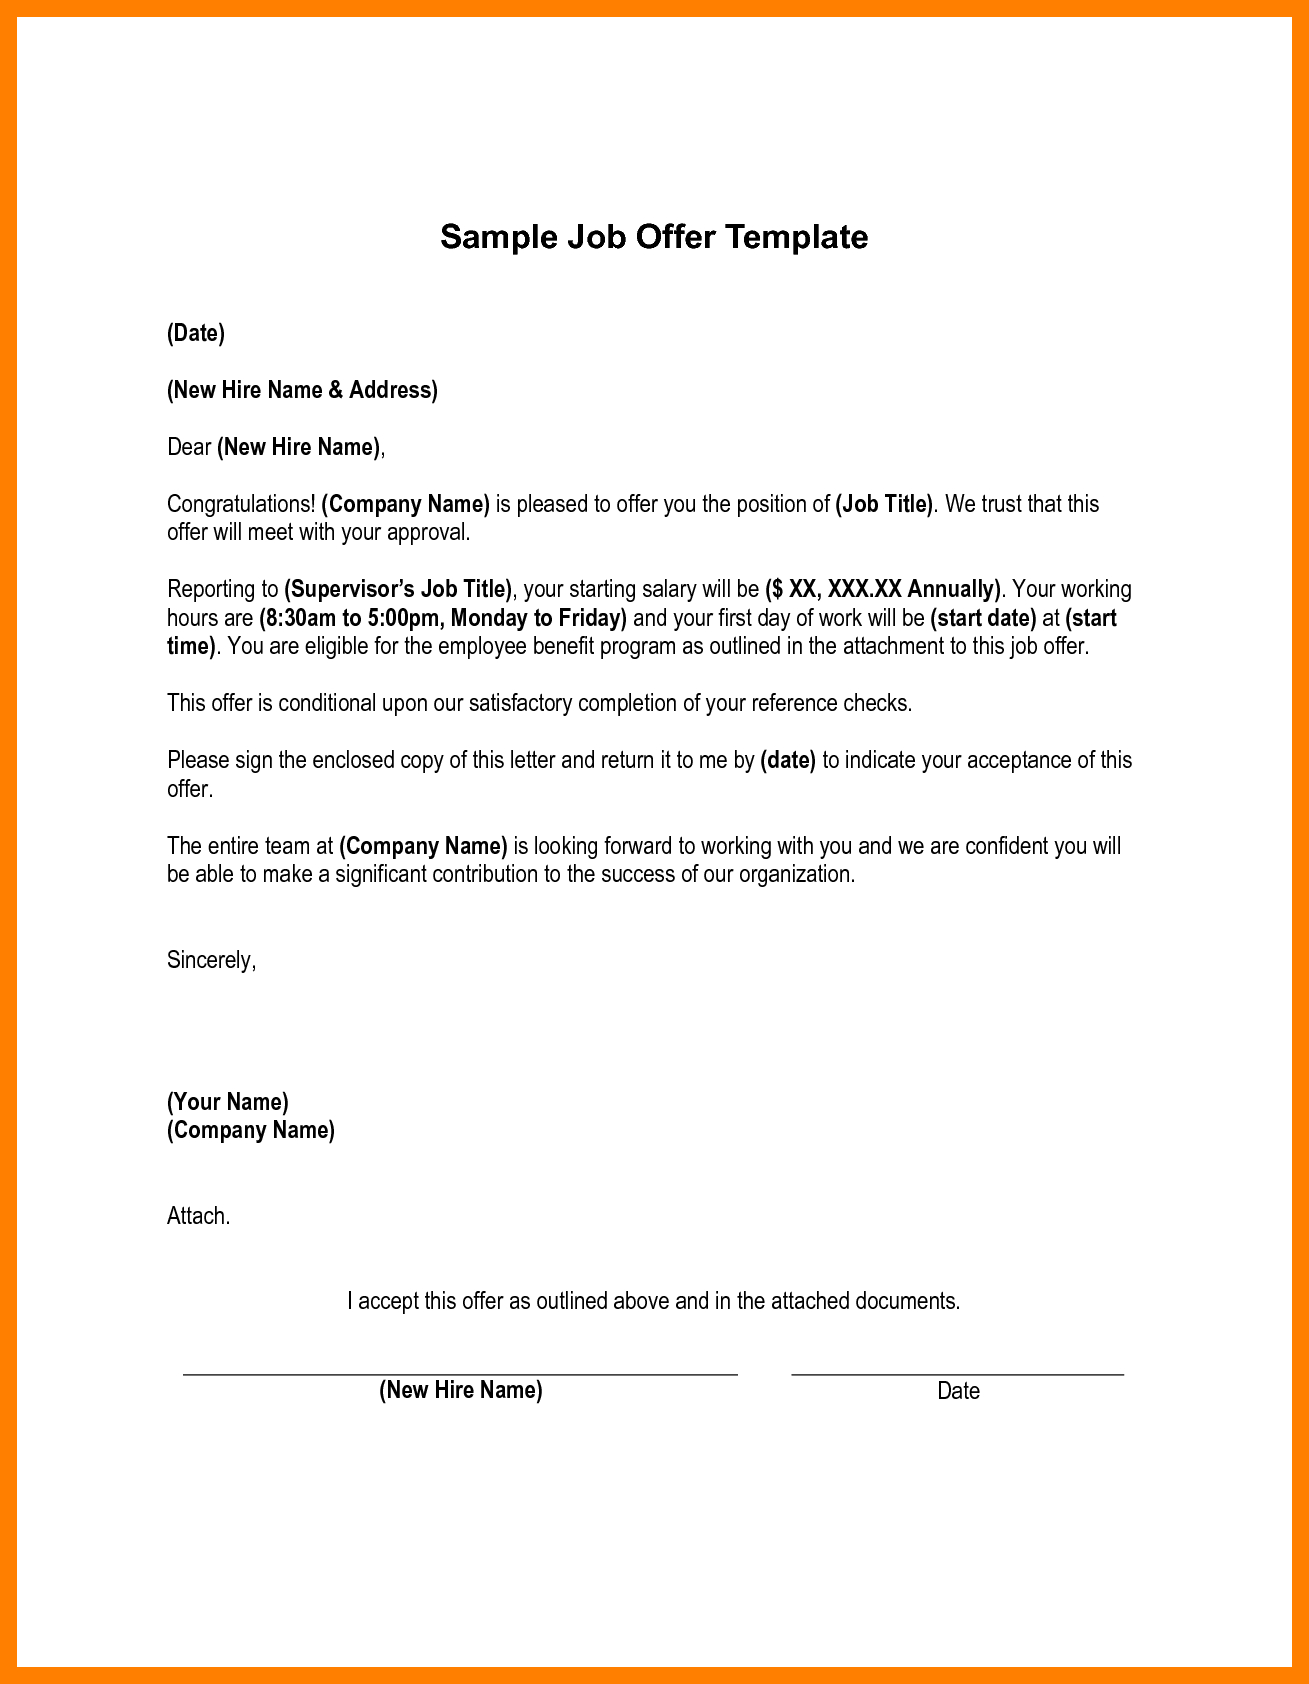 ach-revocation-letter-template-examples-letter-template-collection